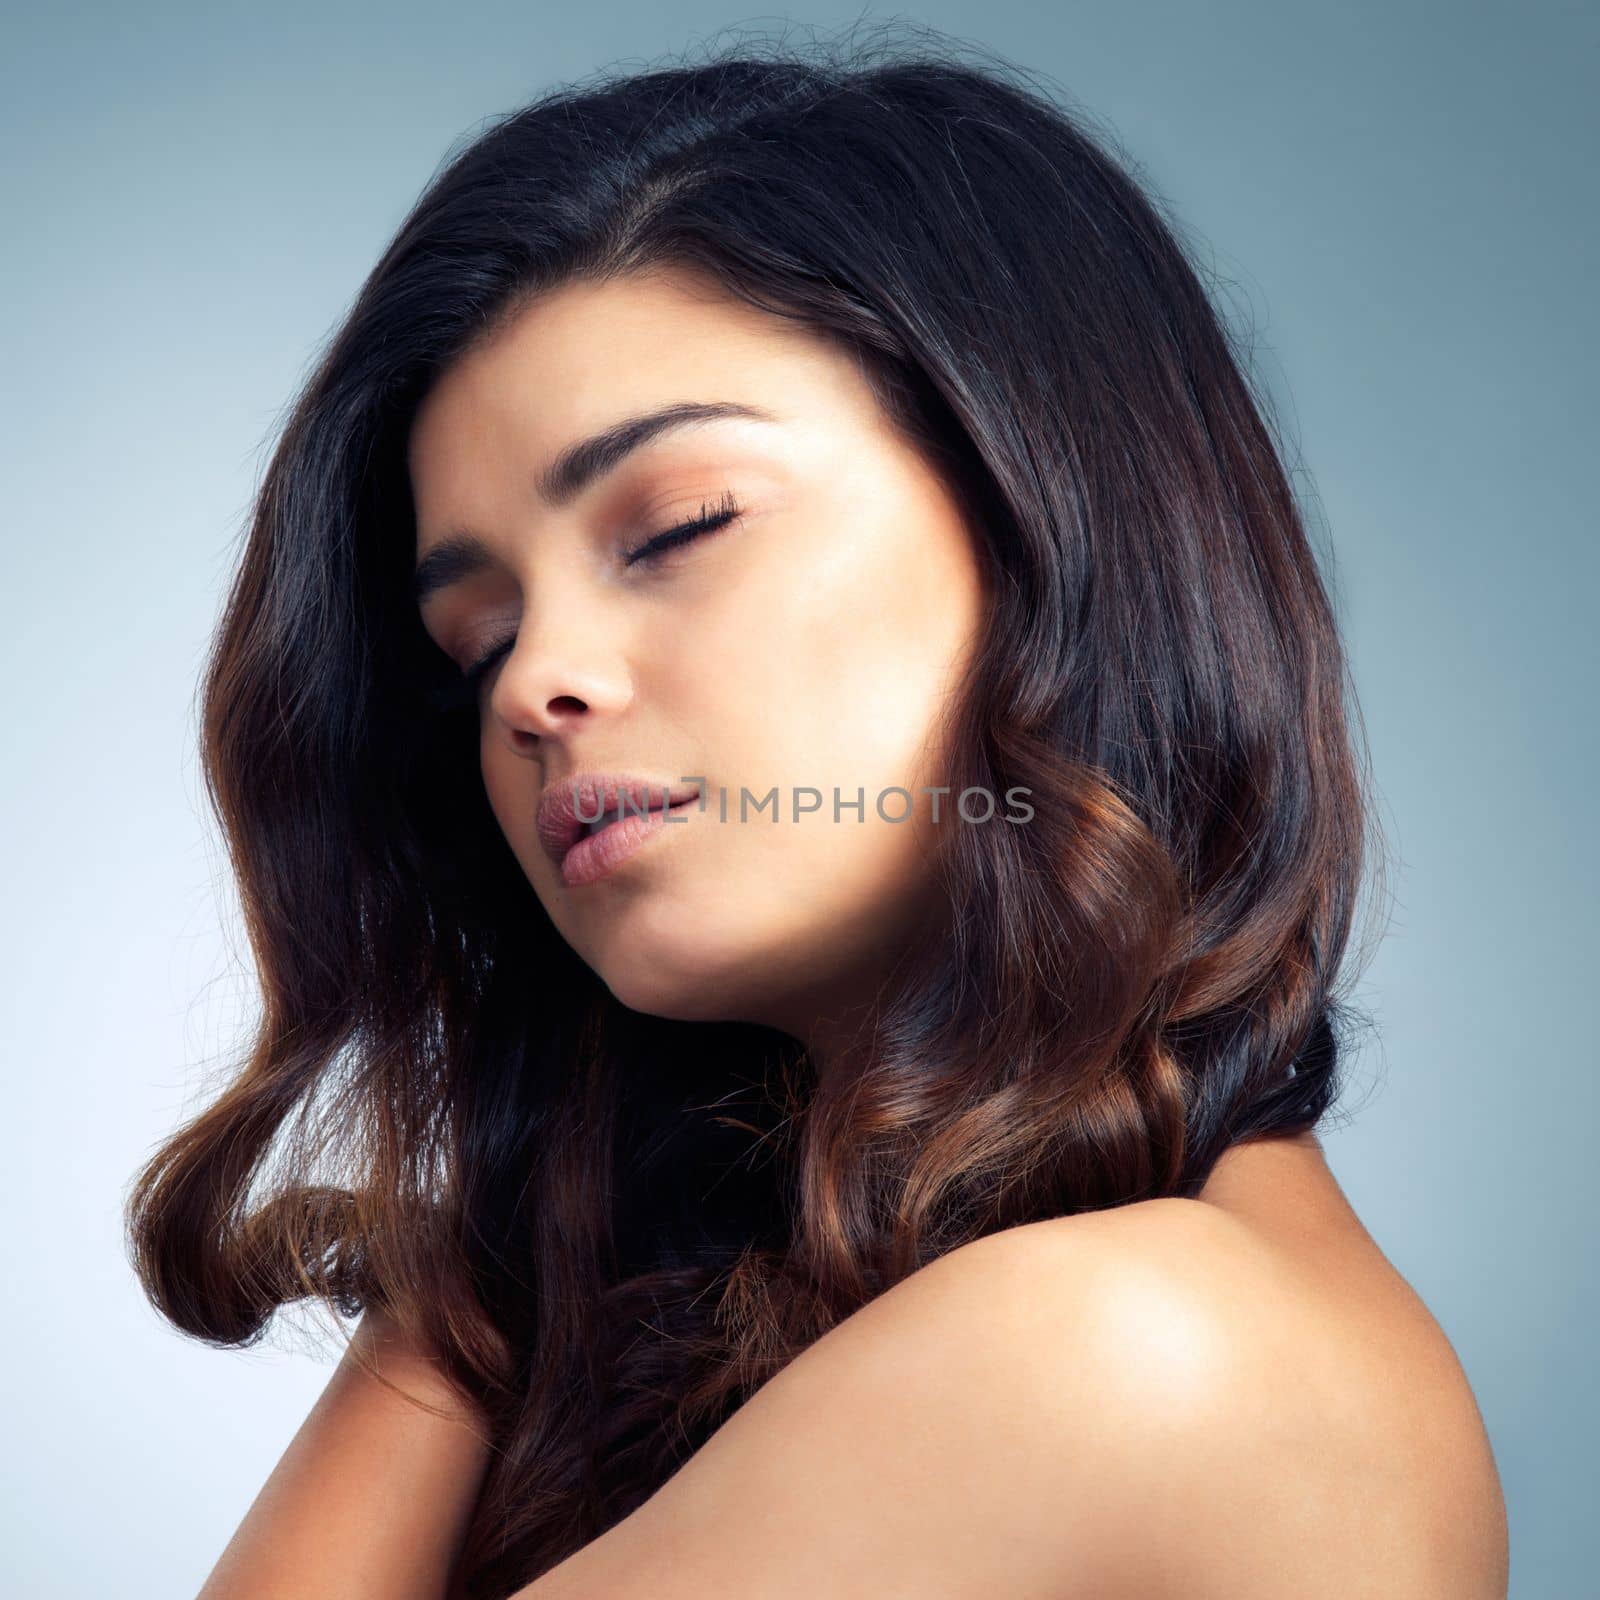 Beauty doesnt get any more beautiful than her. Studio shot of a beautiful young woman posing against a gray background